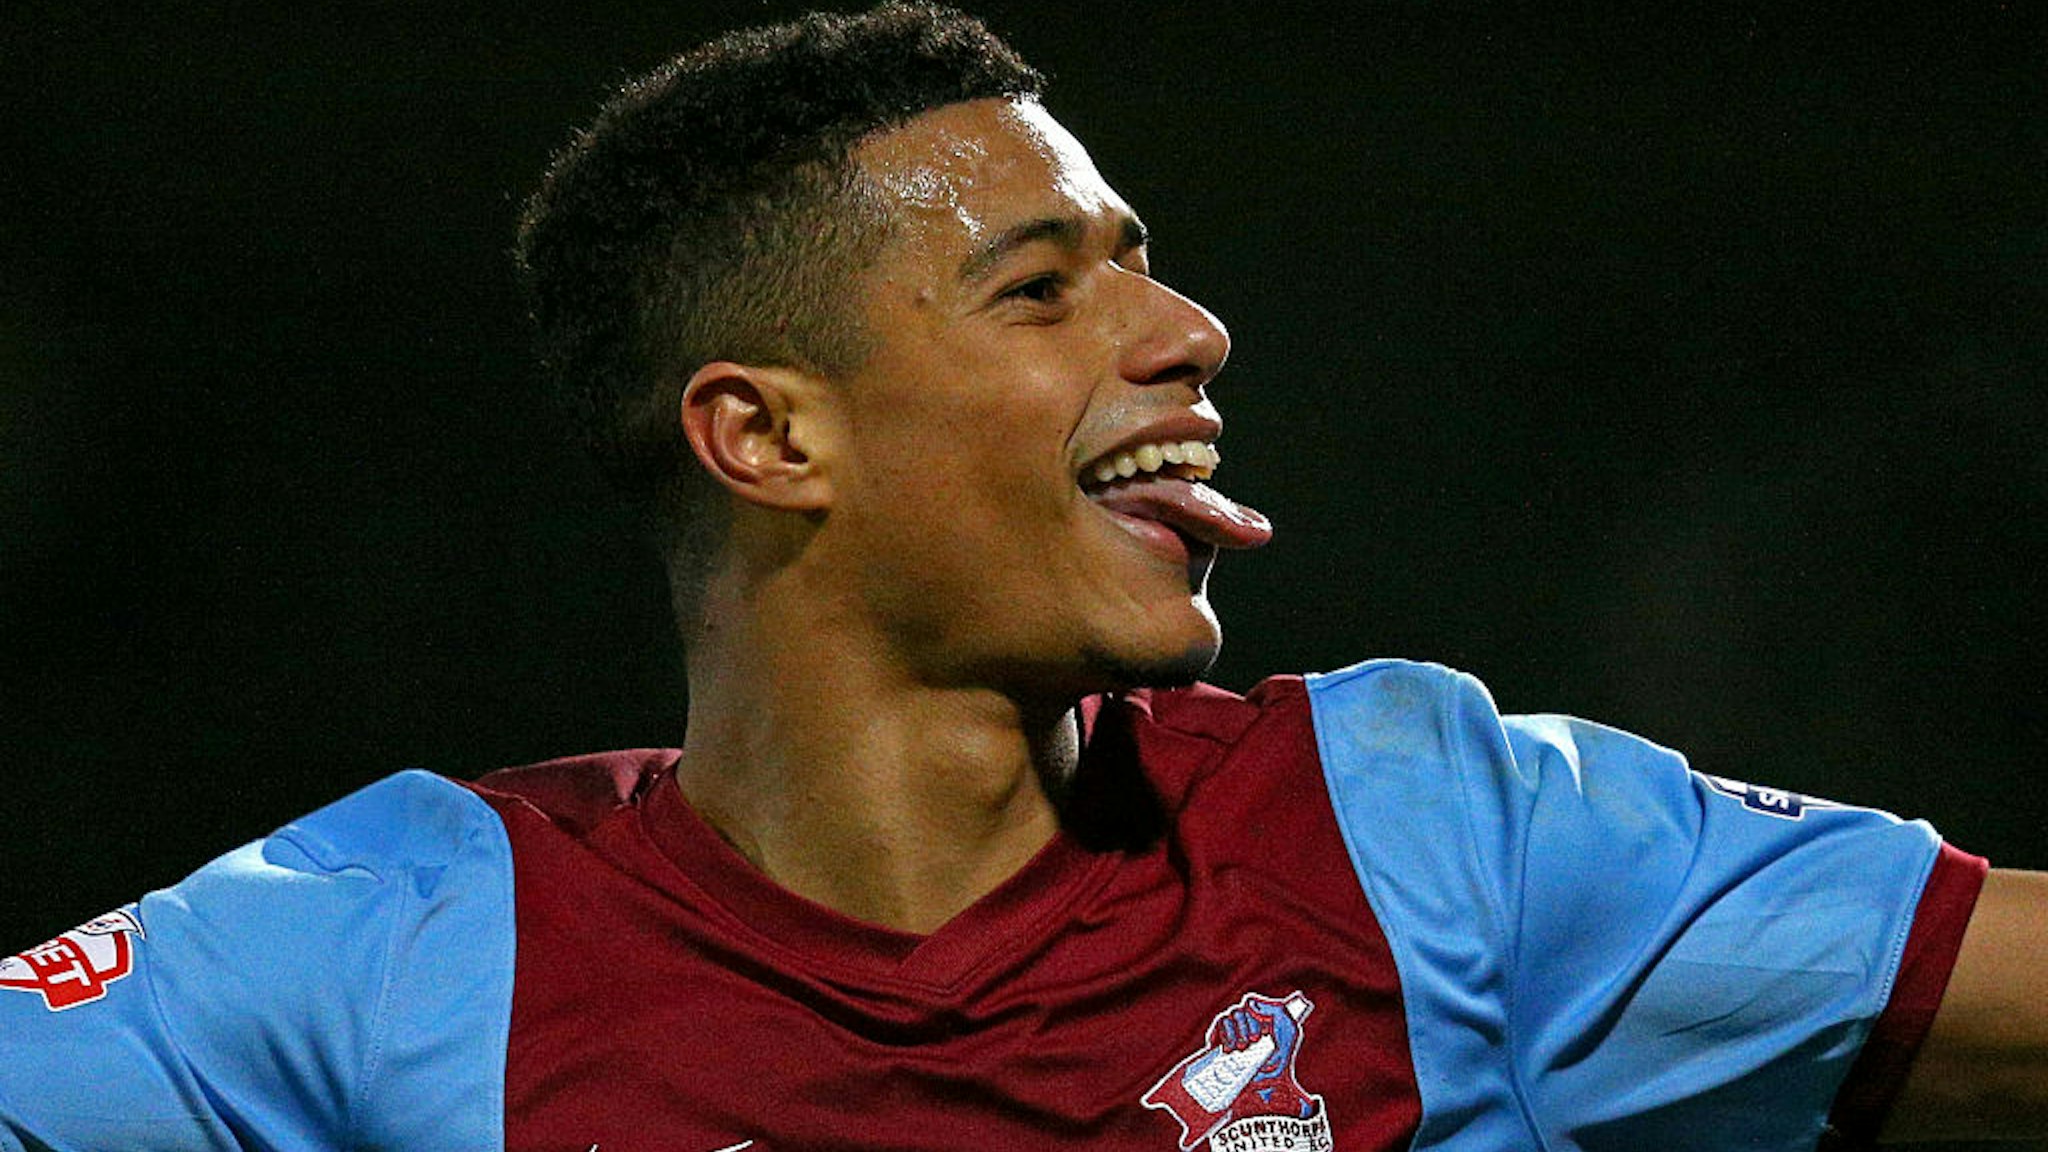 Lyle Taylor of Scunthorpe celebrates after scoring his team's second goal during the FA Cup Third Round match between Scunthorpe United and Chesterfield FC at Glanford Park on January 6, 2015 in Scunthorpe, England.